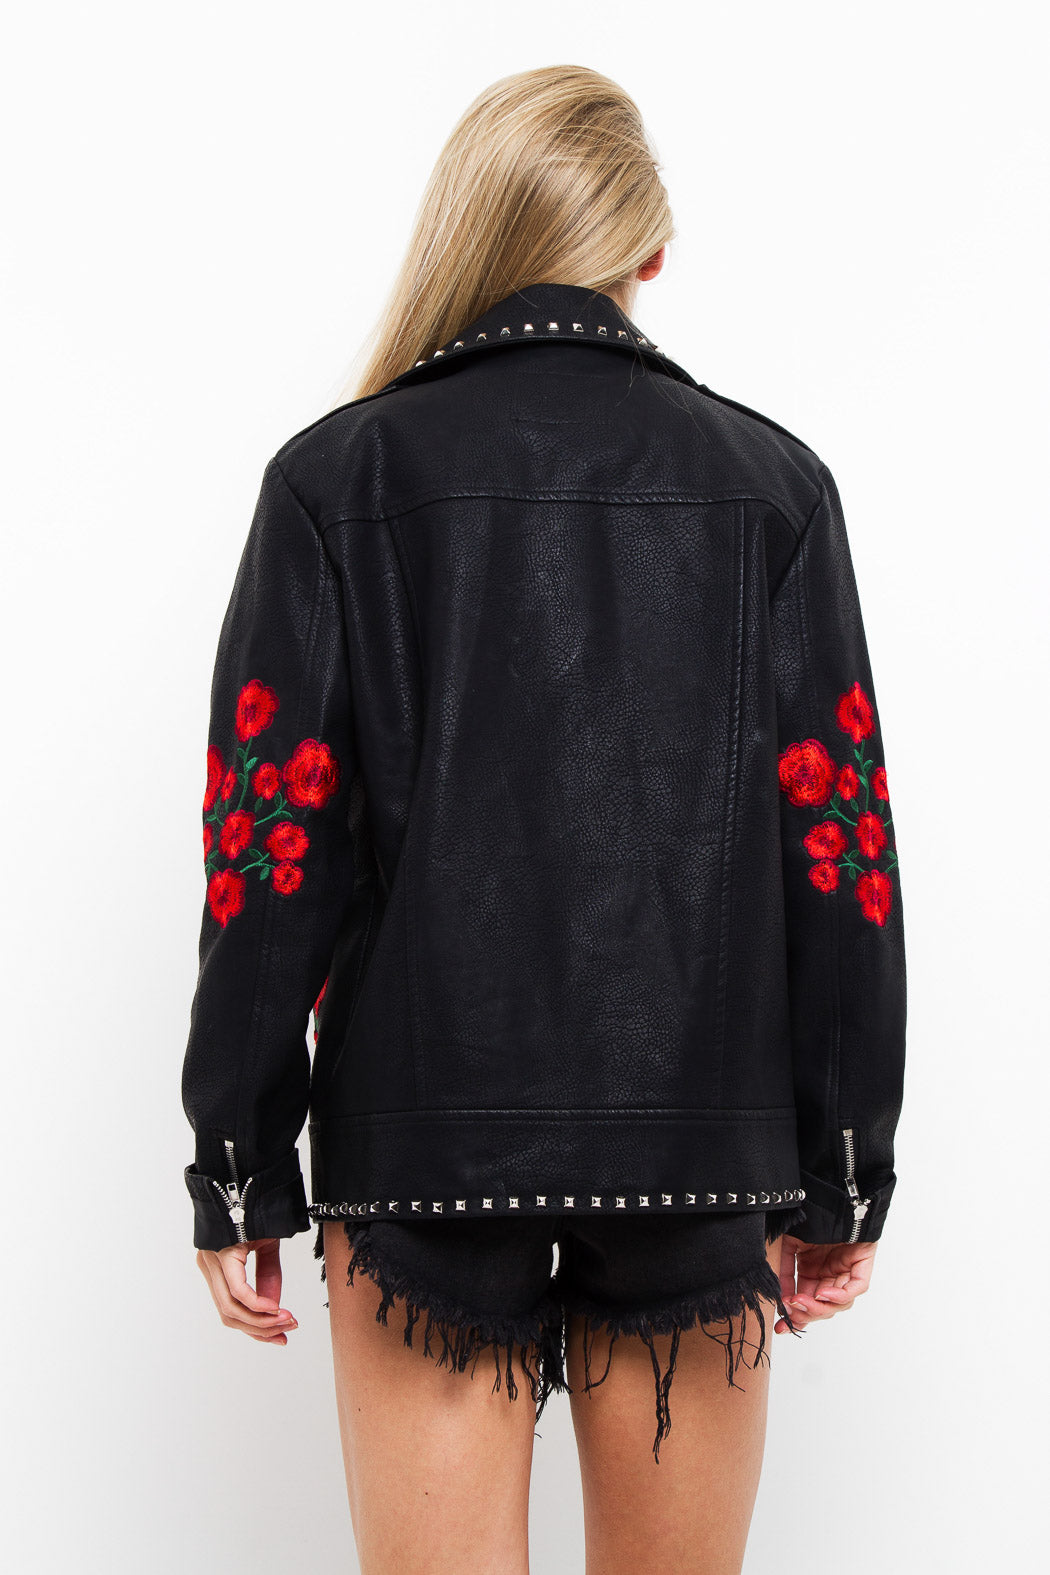 "Roses Are Red" Embroidered Studded PU Jacket